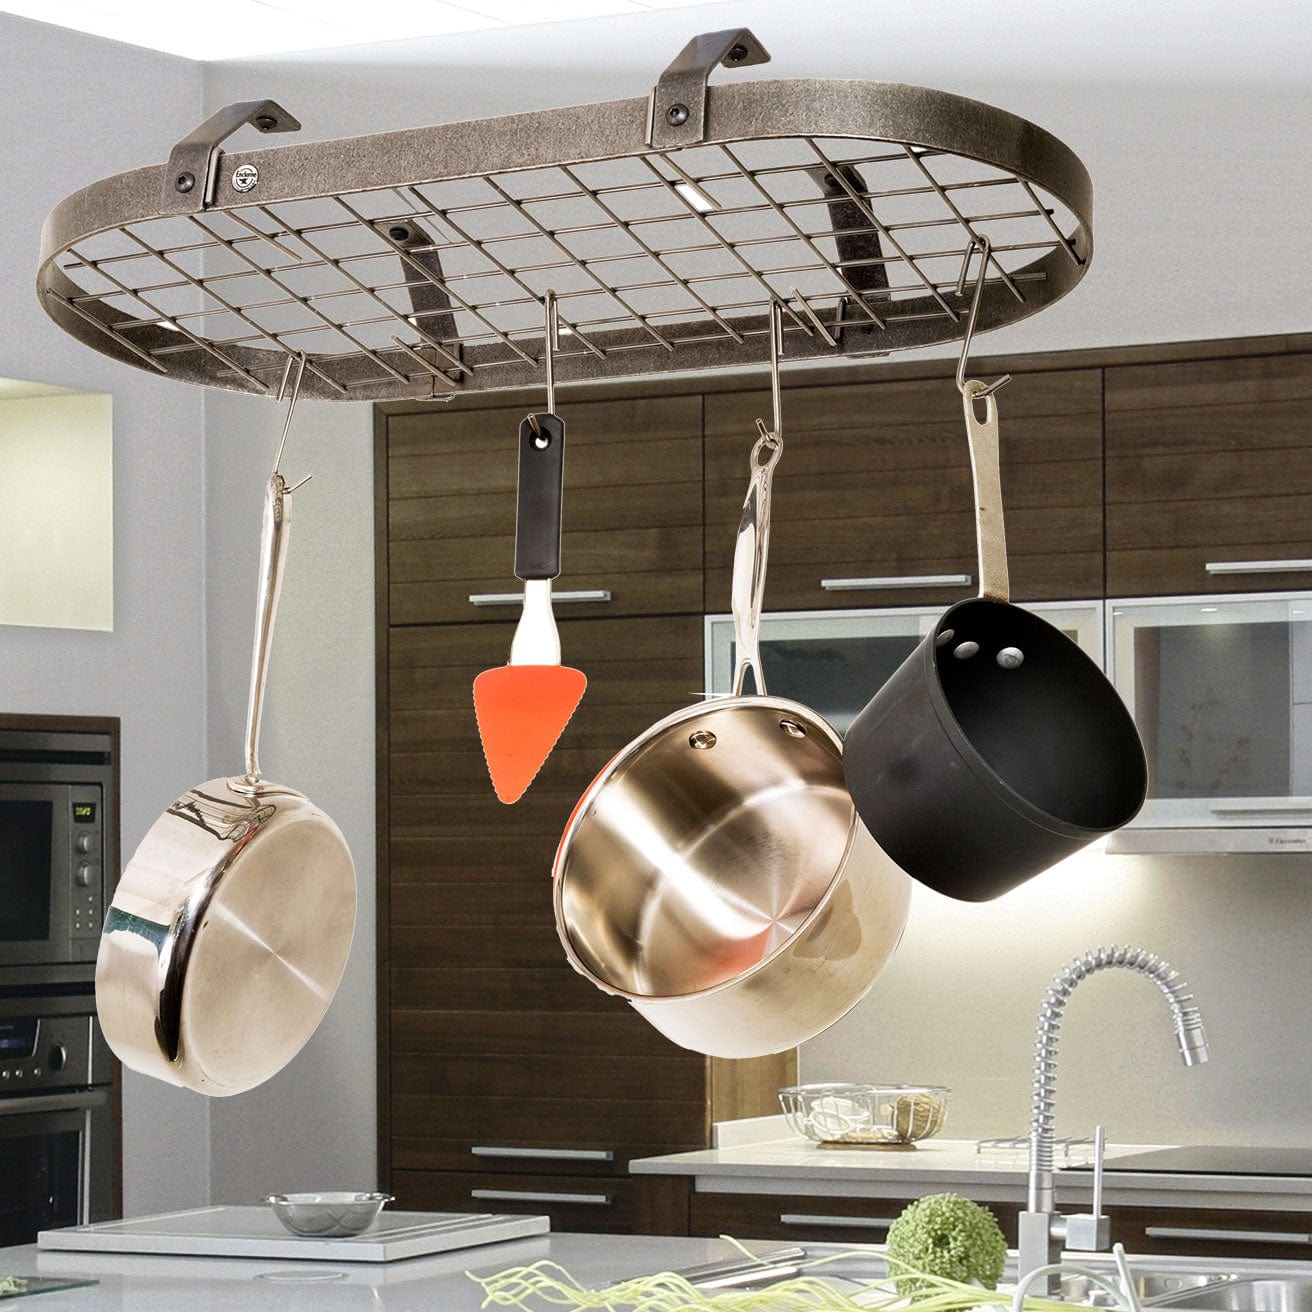 Enclume Low Ceiling Oval Hanging Pot Rack